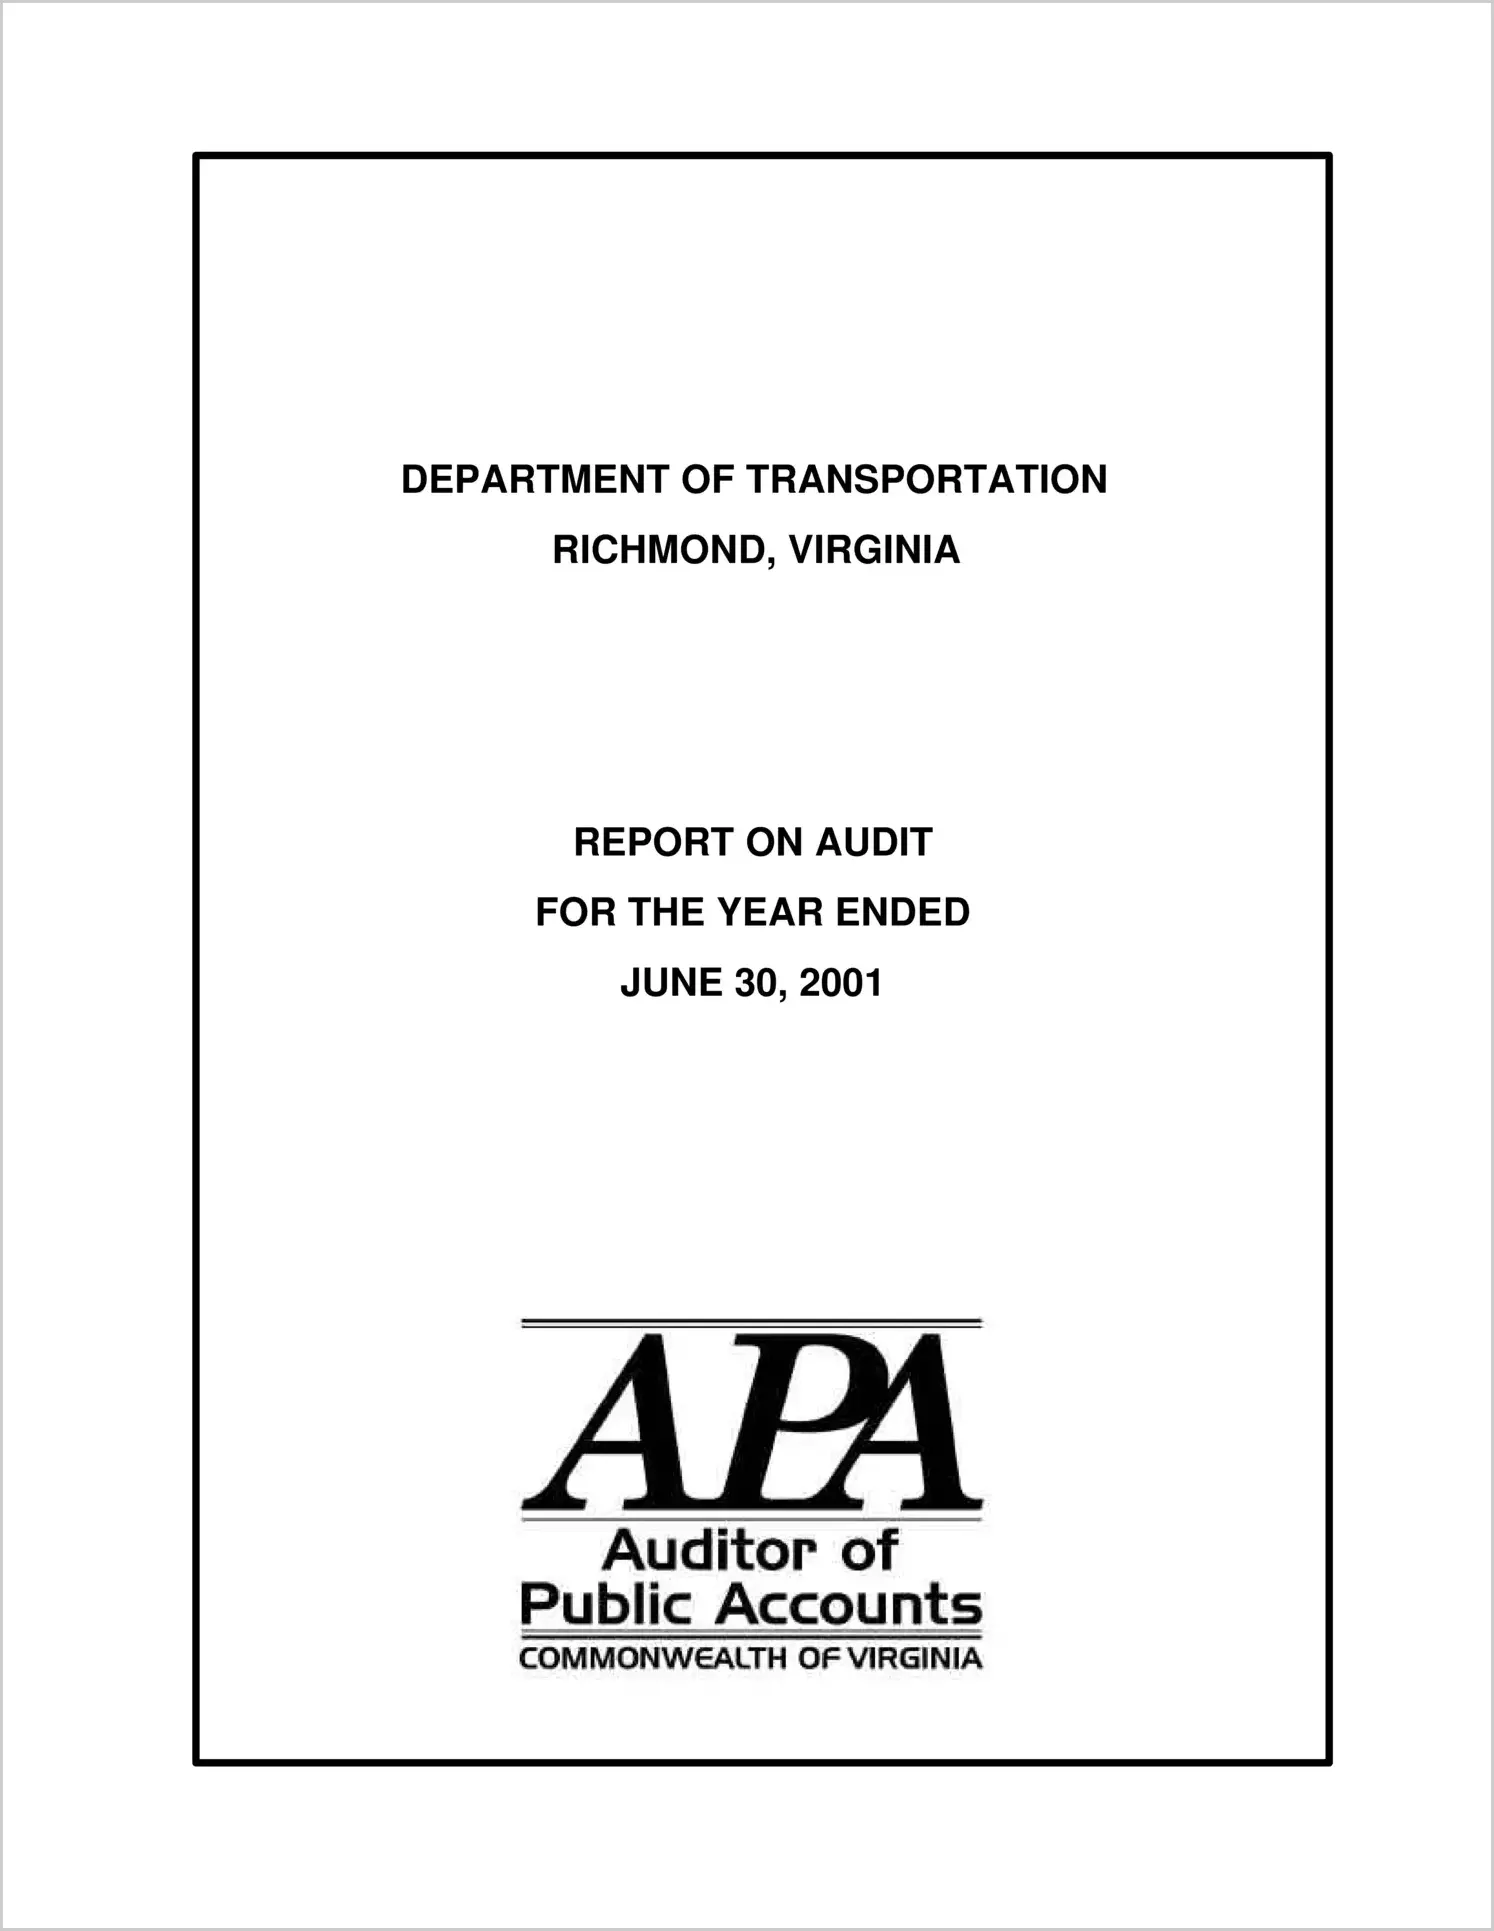 Department of Transportation for the year ended June 30, 2001